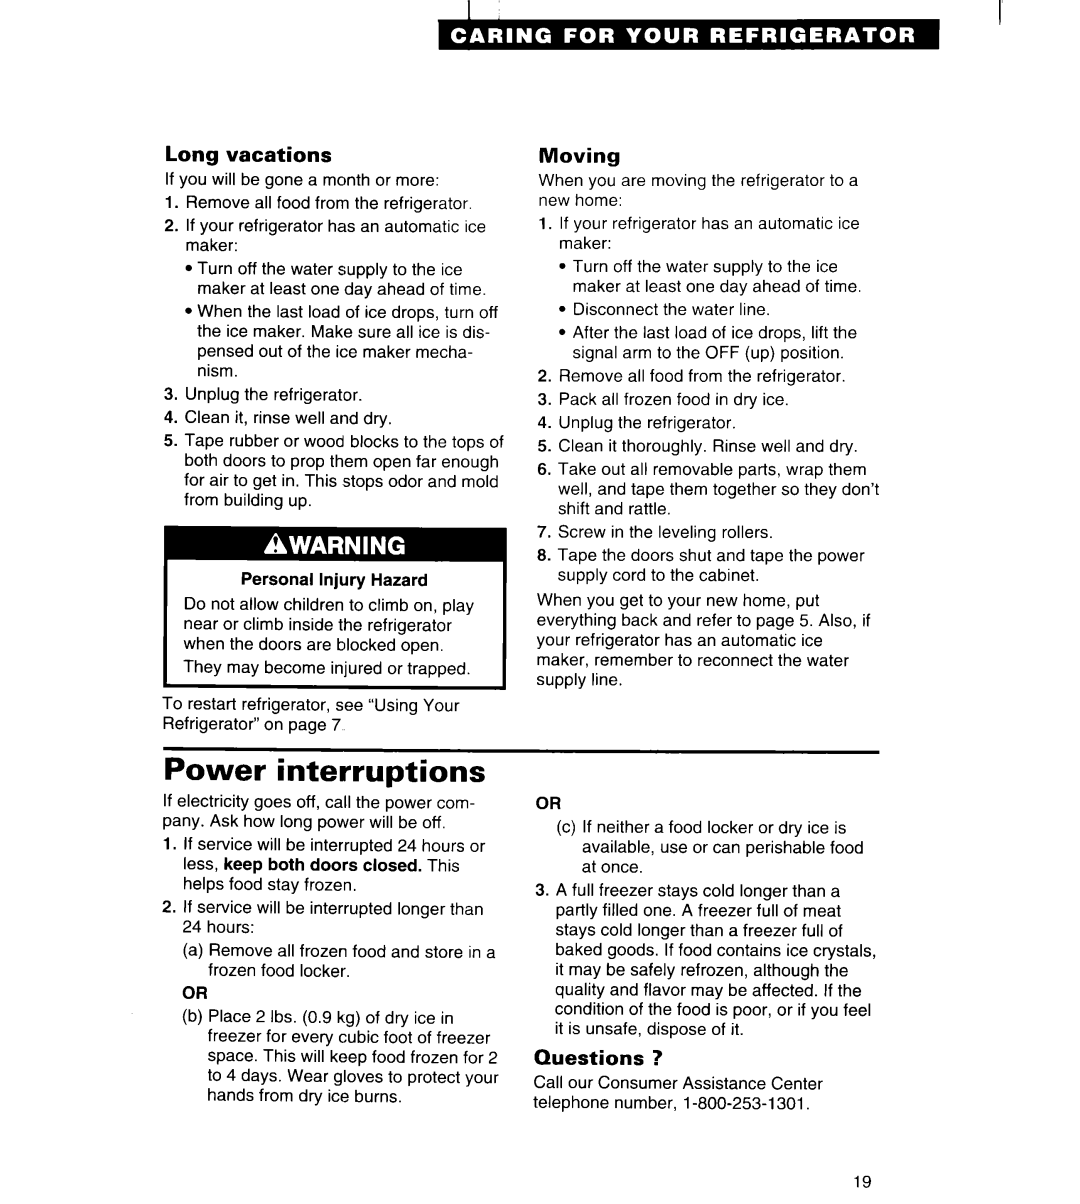 Whirlpool ET25DK important safety instructions Power interruptions, Long vacations, Moving, Questions 